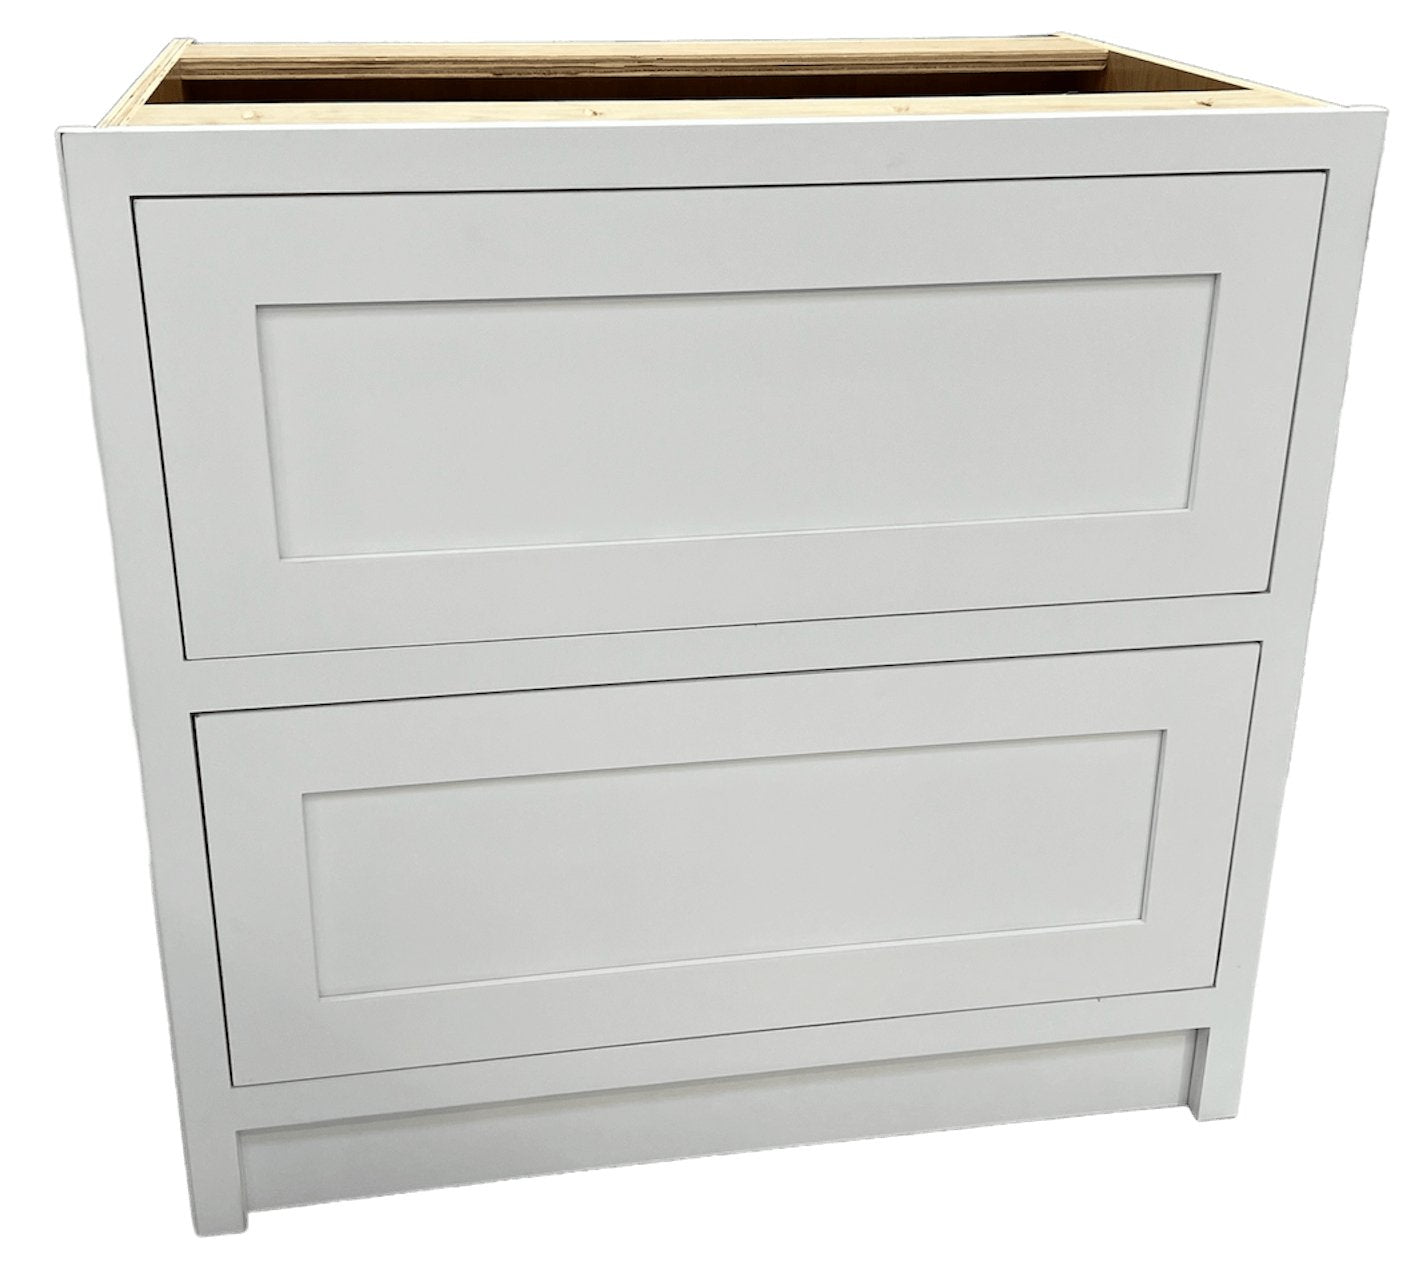 BD2 900 - 900mm Wide 2 drawer base plus a hidden internal drawer - Classic Kitchens Direct